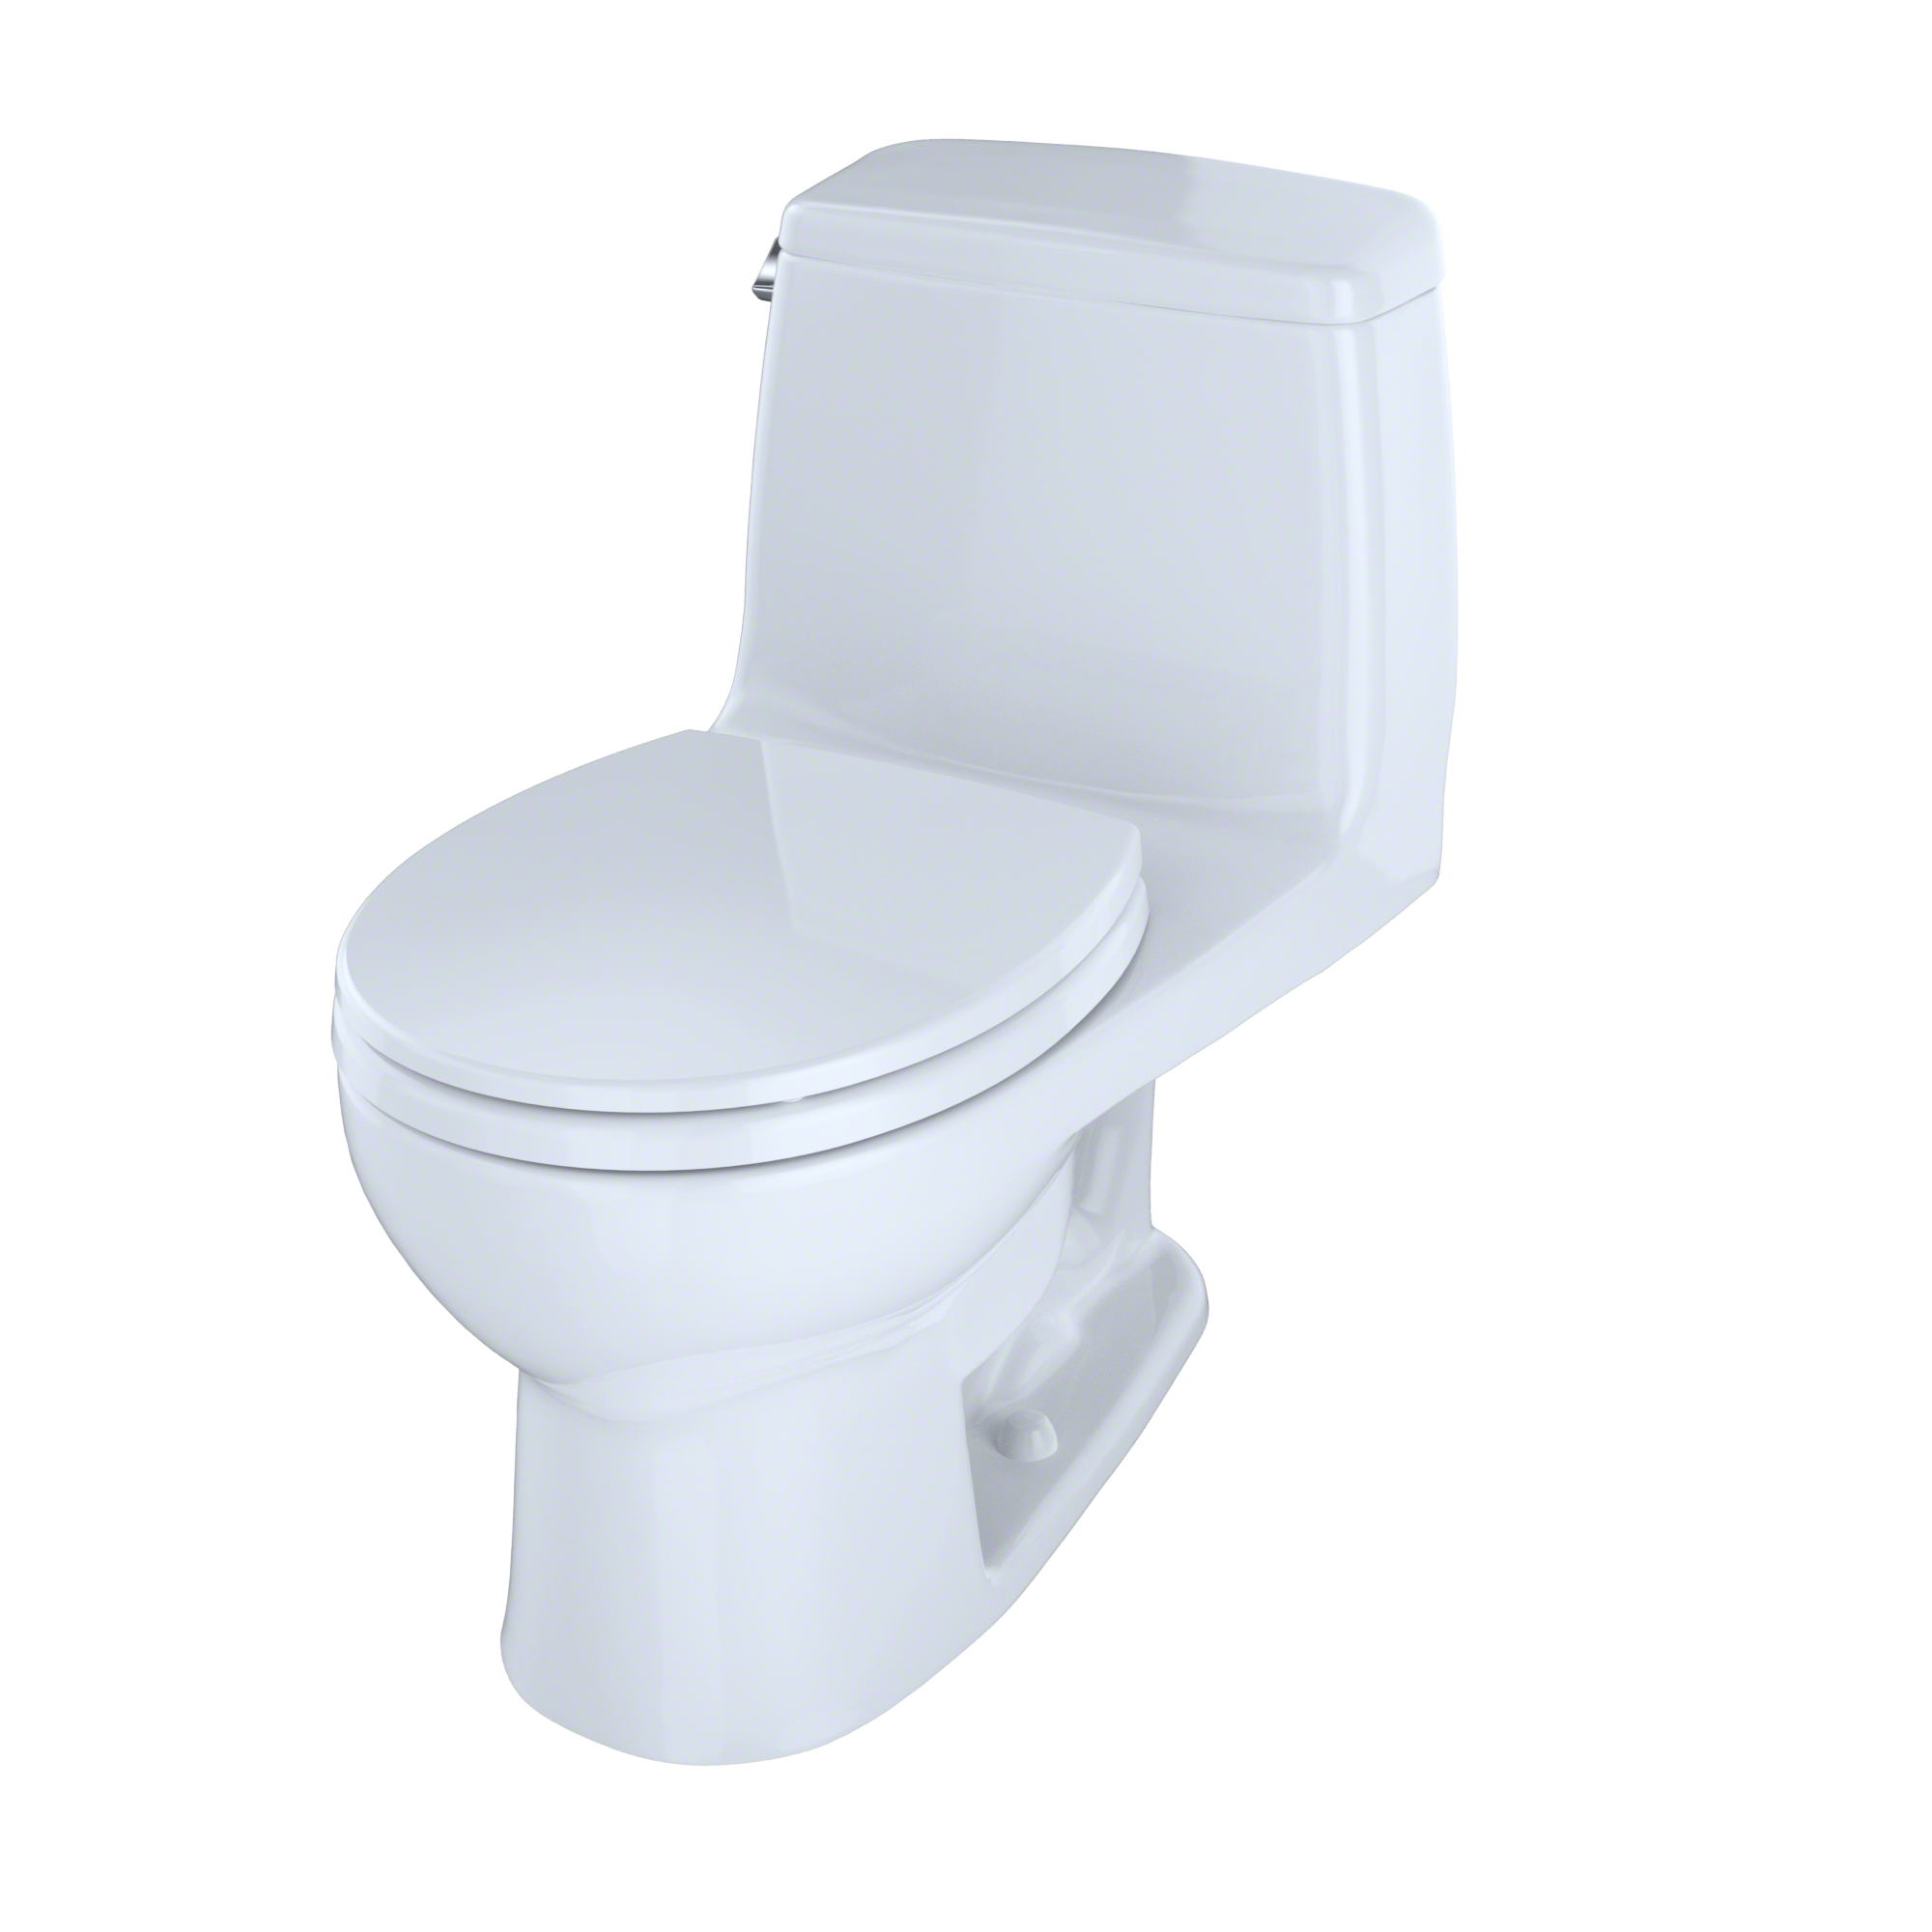 Toto Ms853113s Ultramax 1.6 Gpf One Piece Round Toilet - - Cotton - image 3 of 5